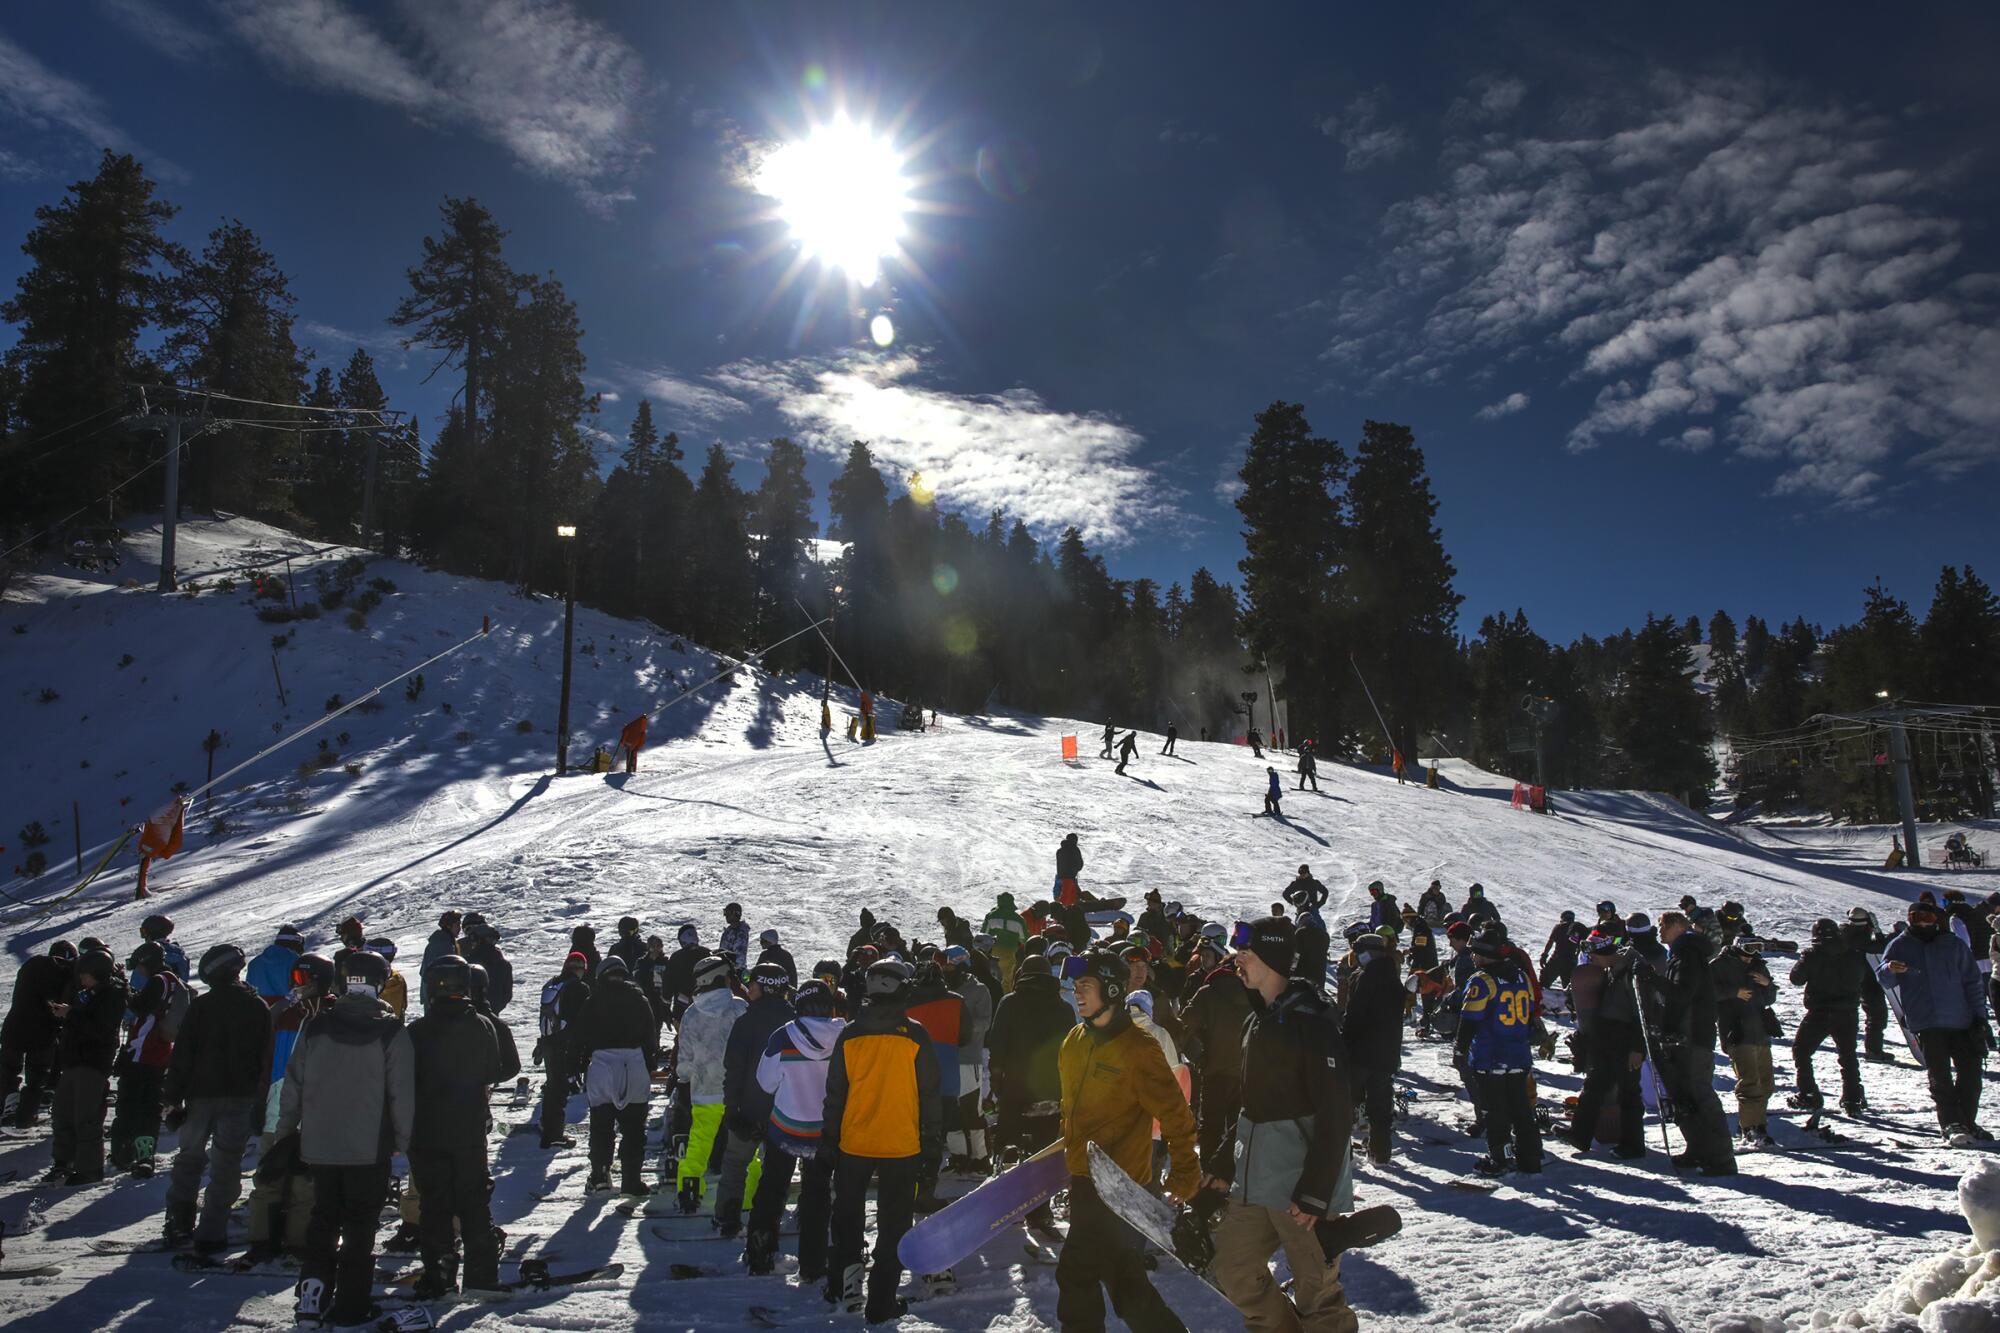 Skiers and snow boarders enjoy freshly fallen snow at Mountain High in Wrightwood on Wednesday.